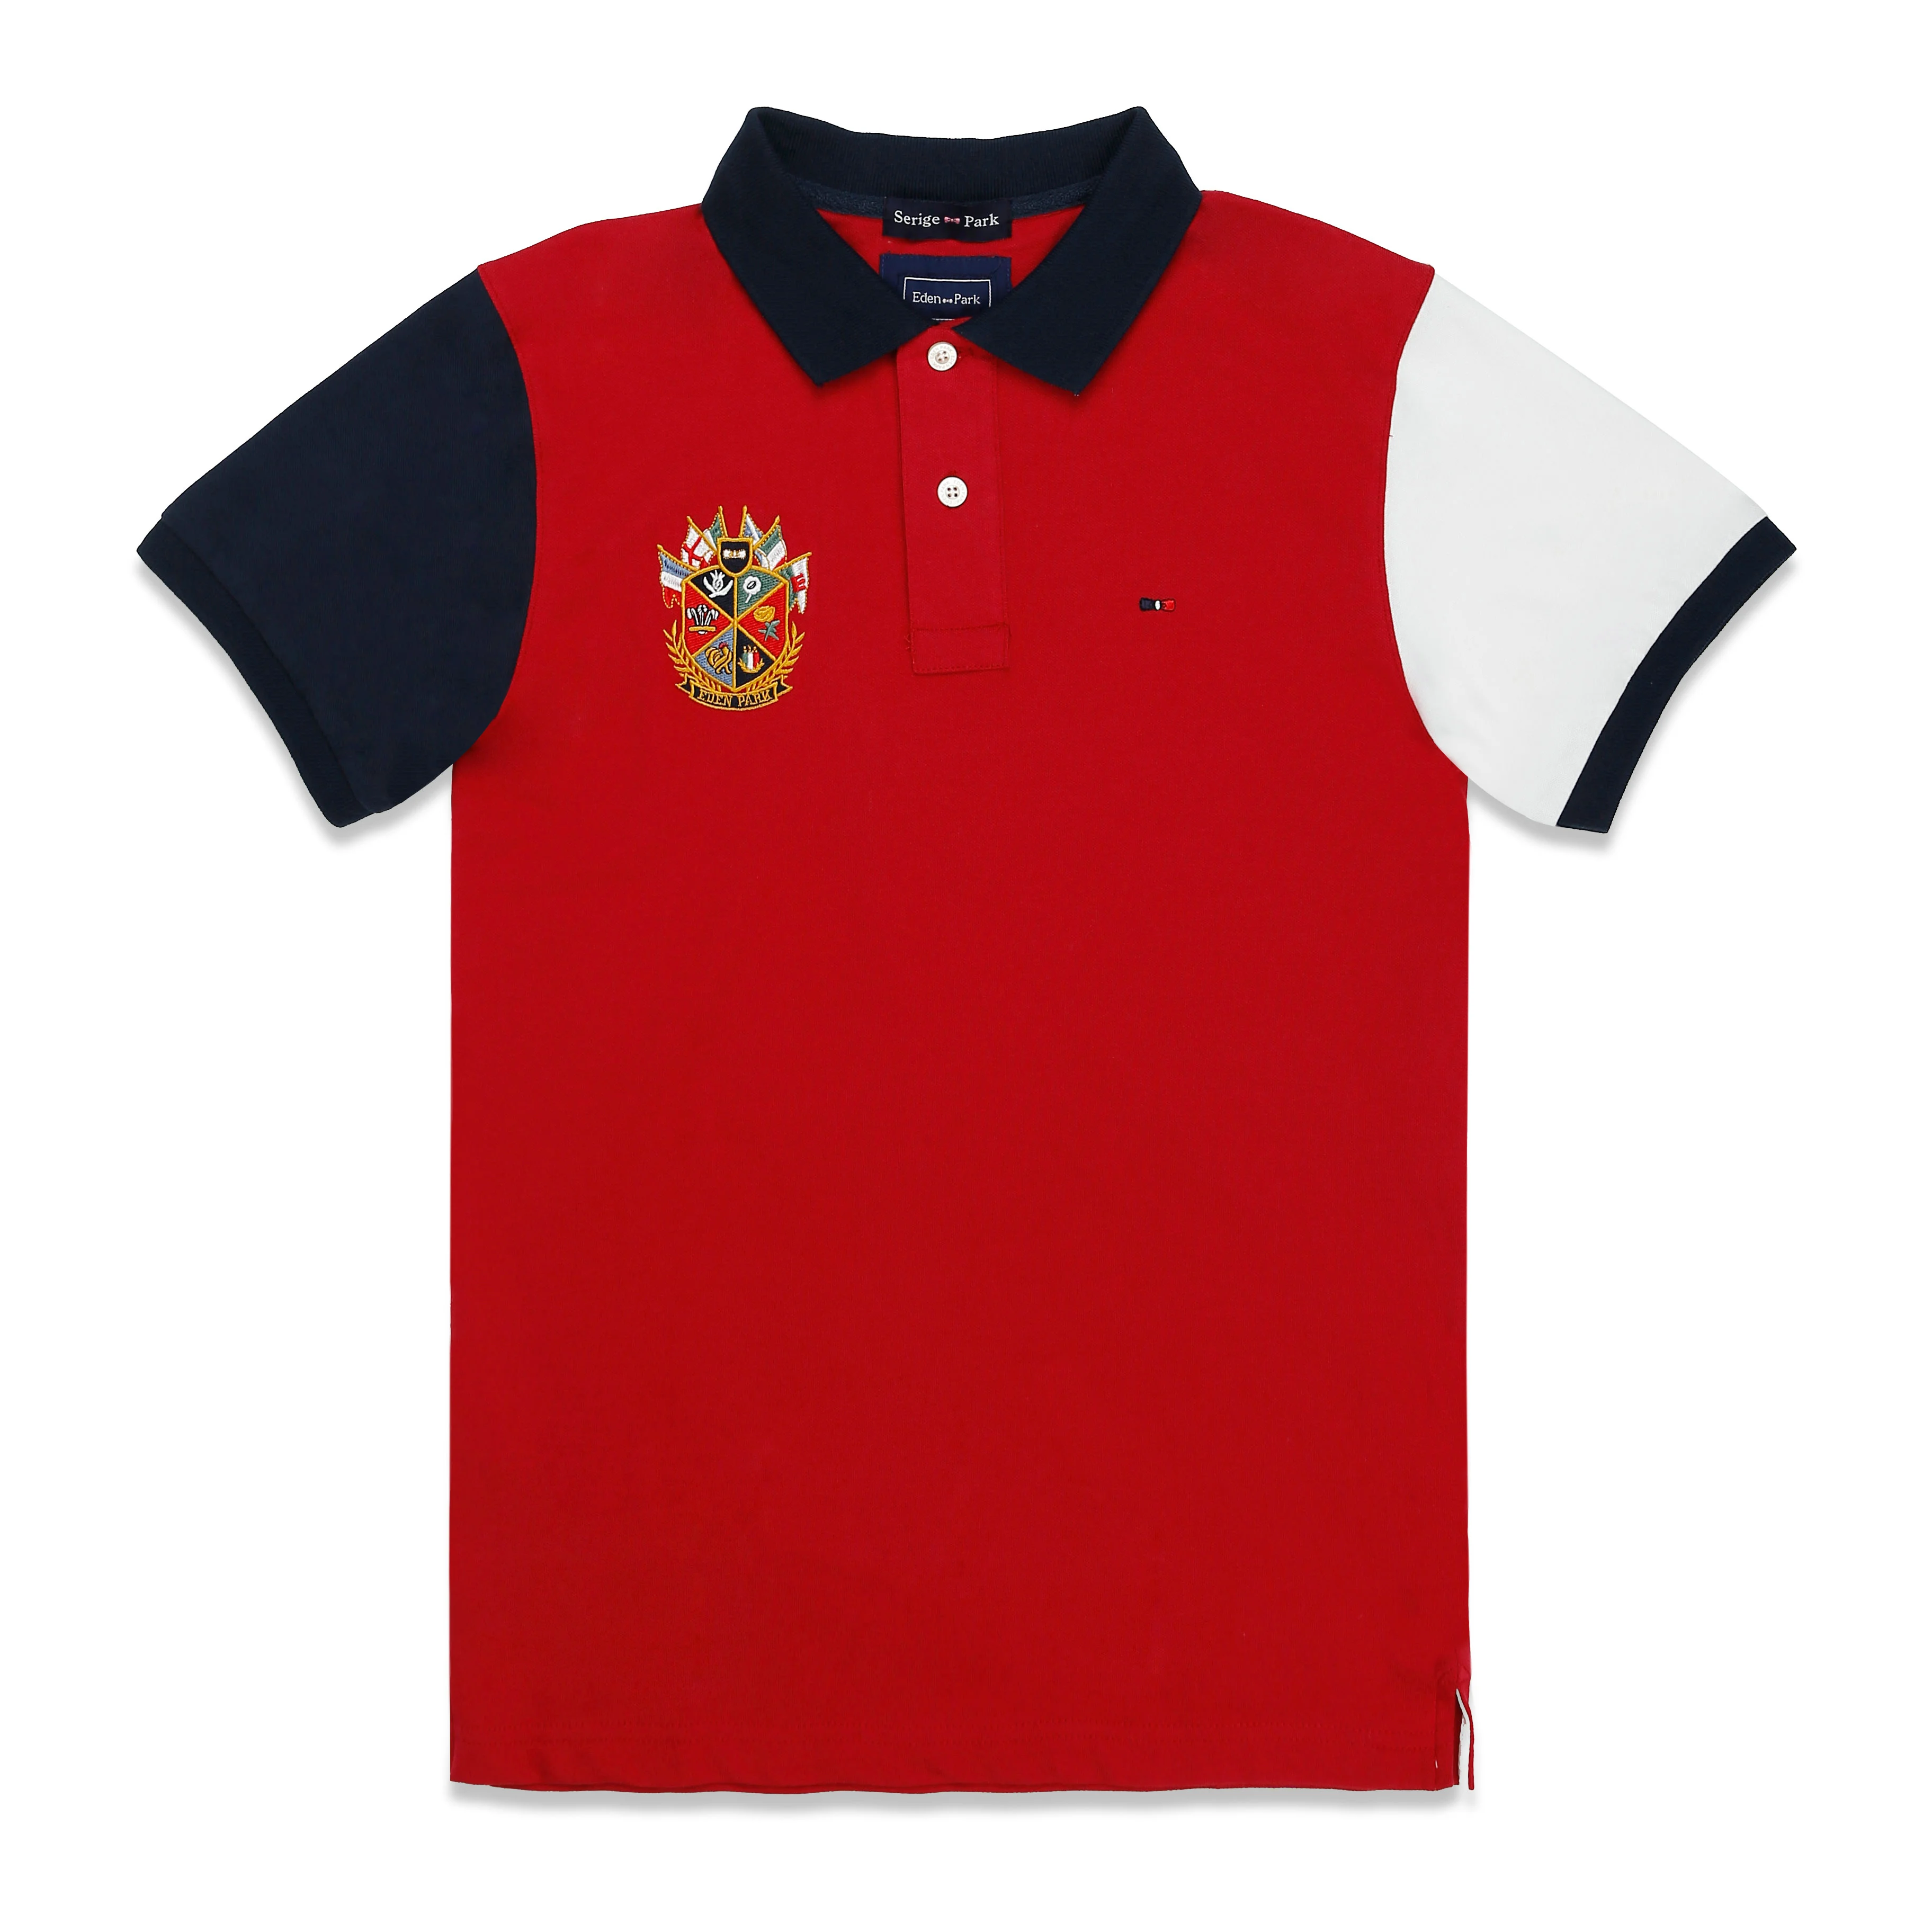 

2019 NEW MEN POLO SHIRTSUMMER HIGH QUALITY BRAND SERIGE EDEN PARK FRANCE BRAND SUPERIOR COTTON MATERIAL AND EXCELLENT QUALITY